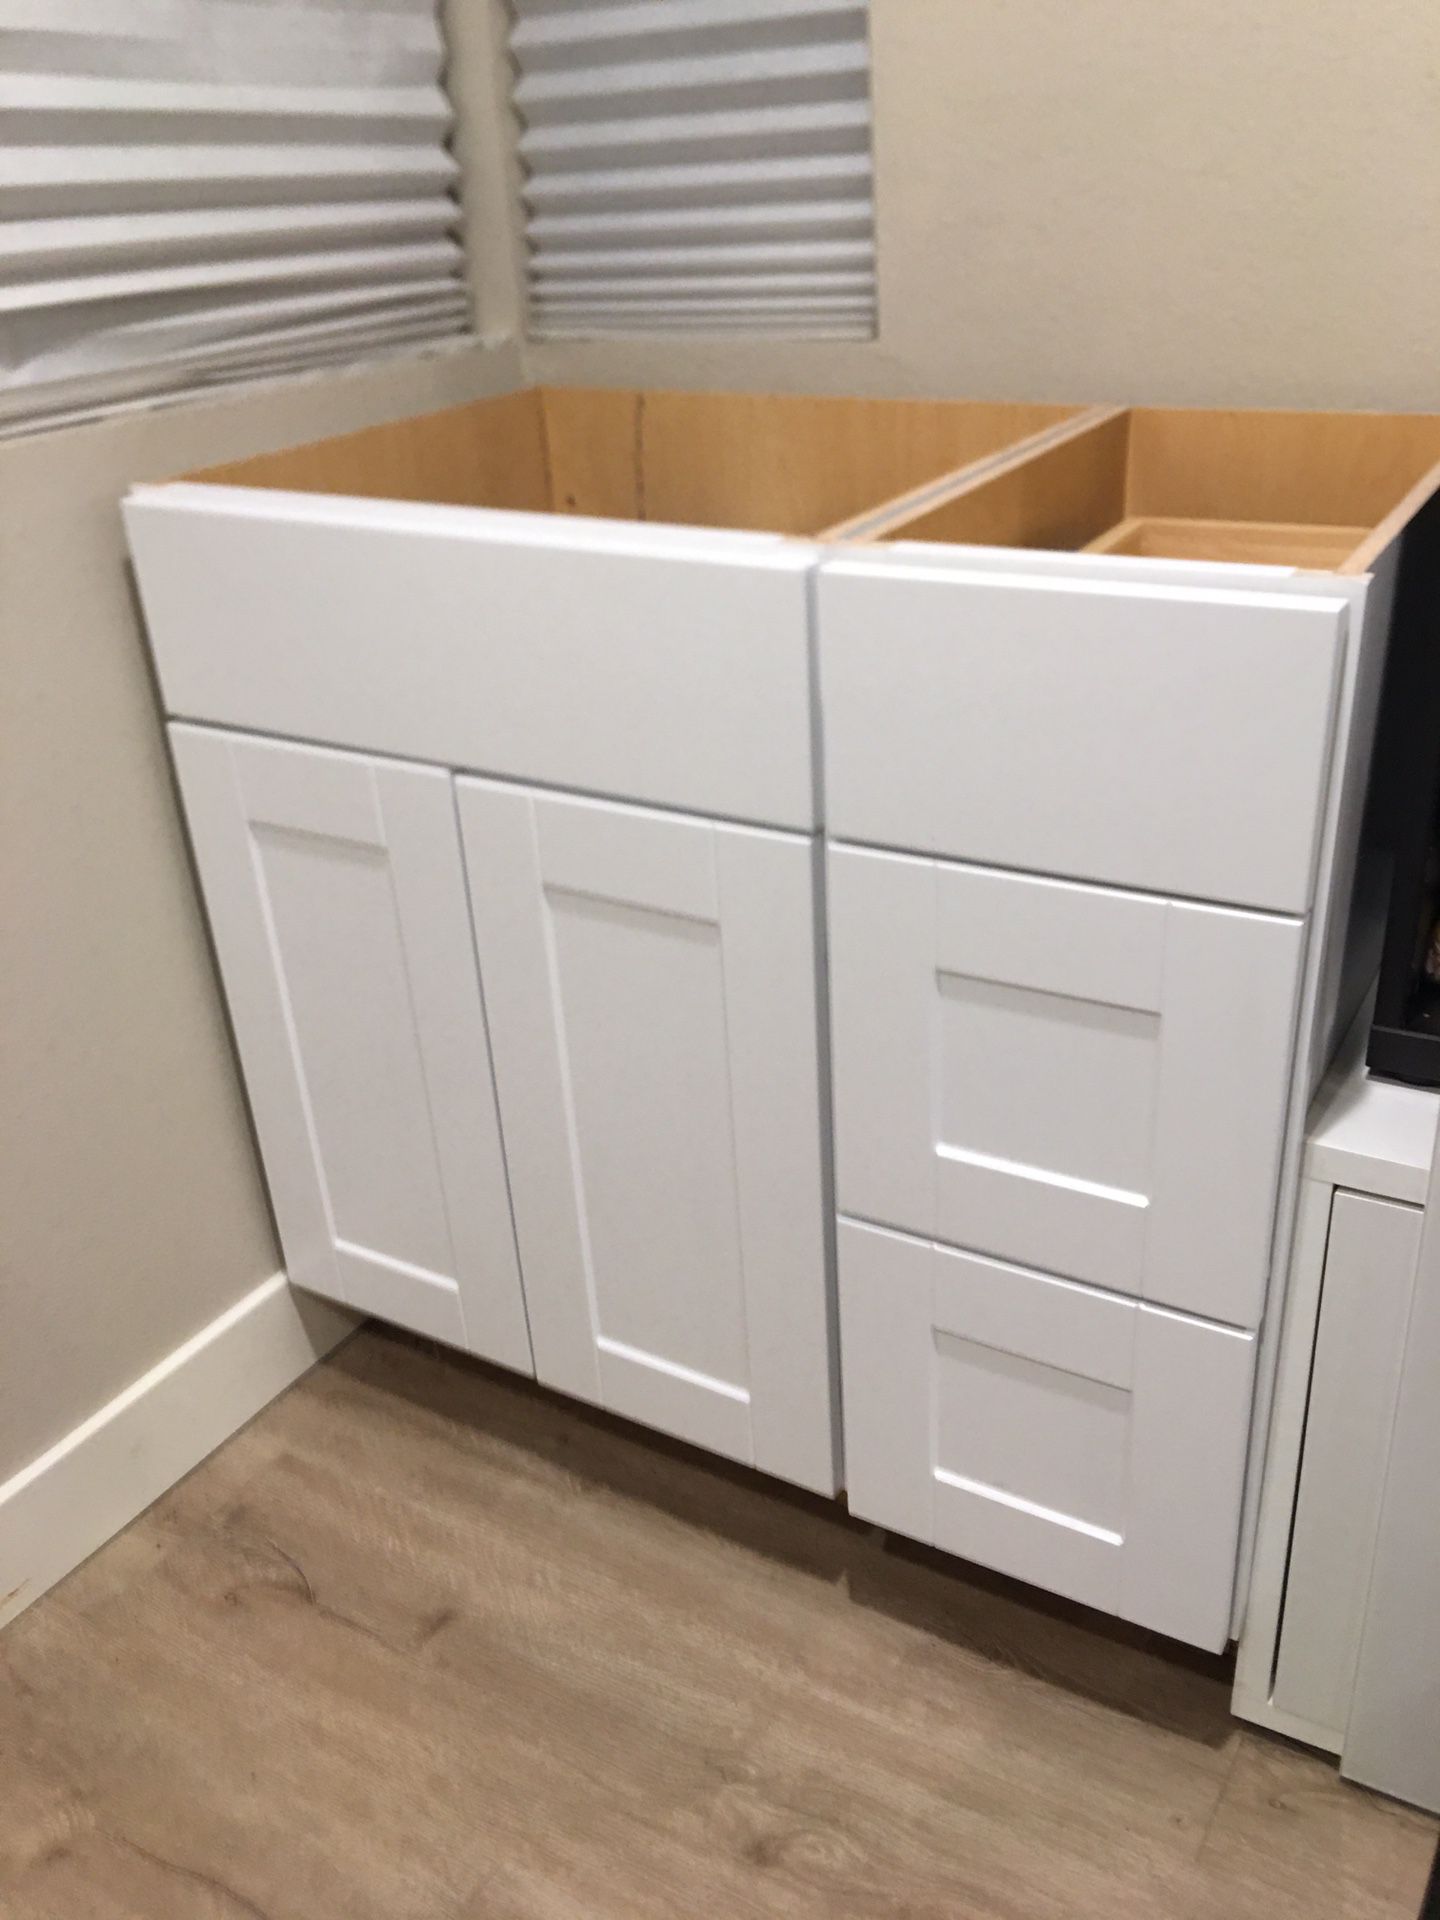 Vanity Drawer Base Cabinet w/ Drawers White kitchen bath laundry $458 - Check Out My Other Items I Have Free Stuff Too